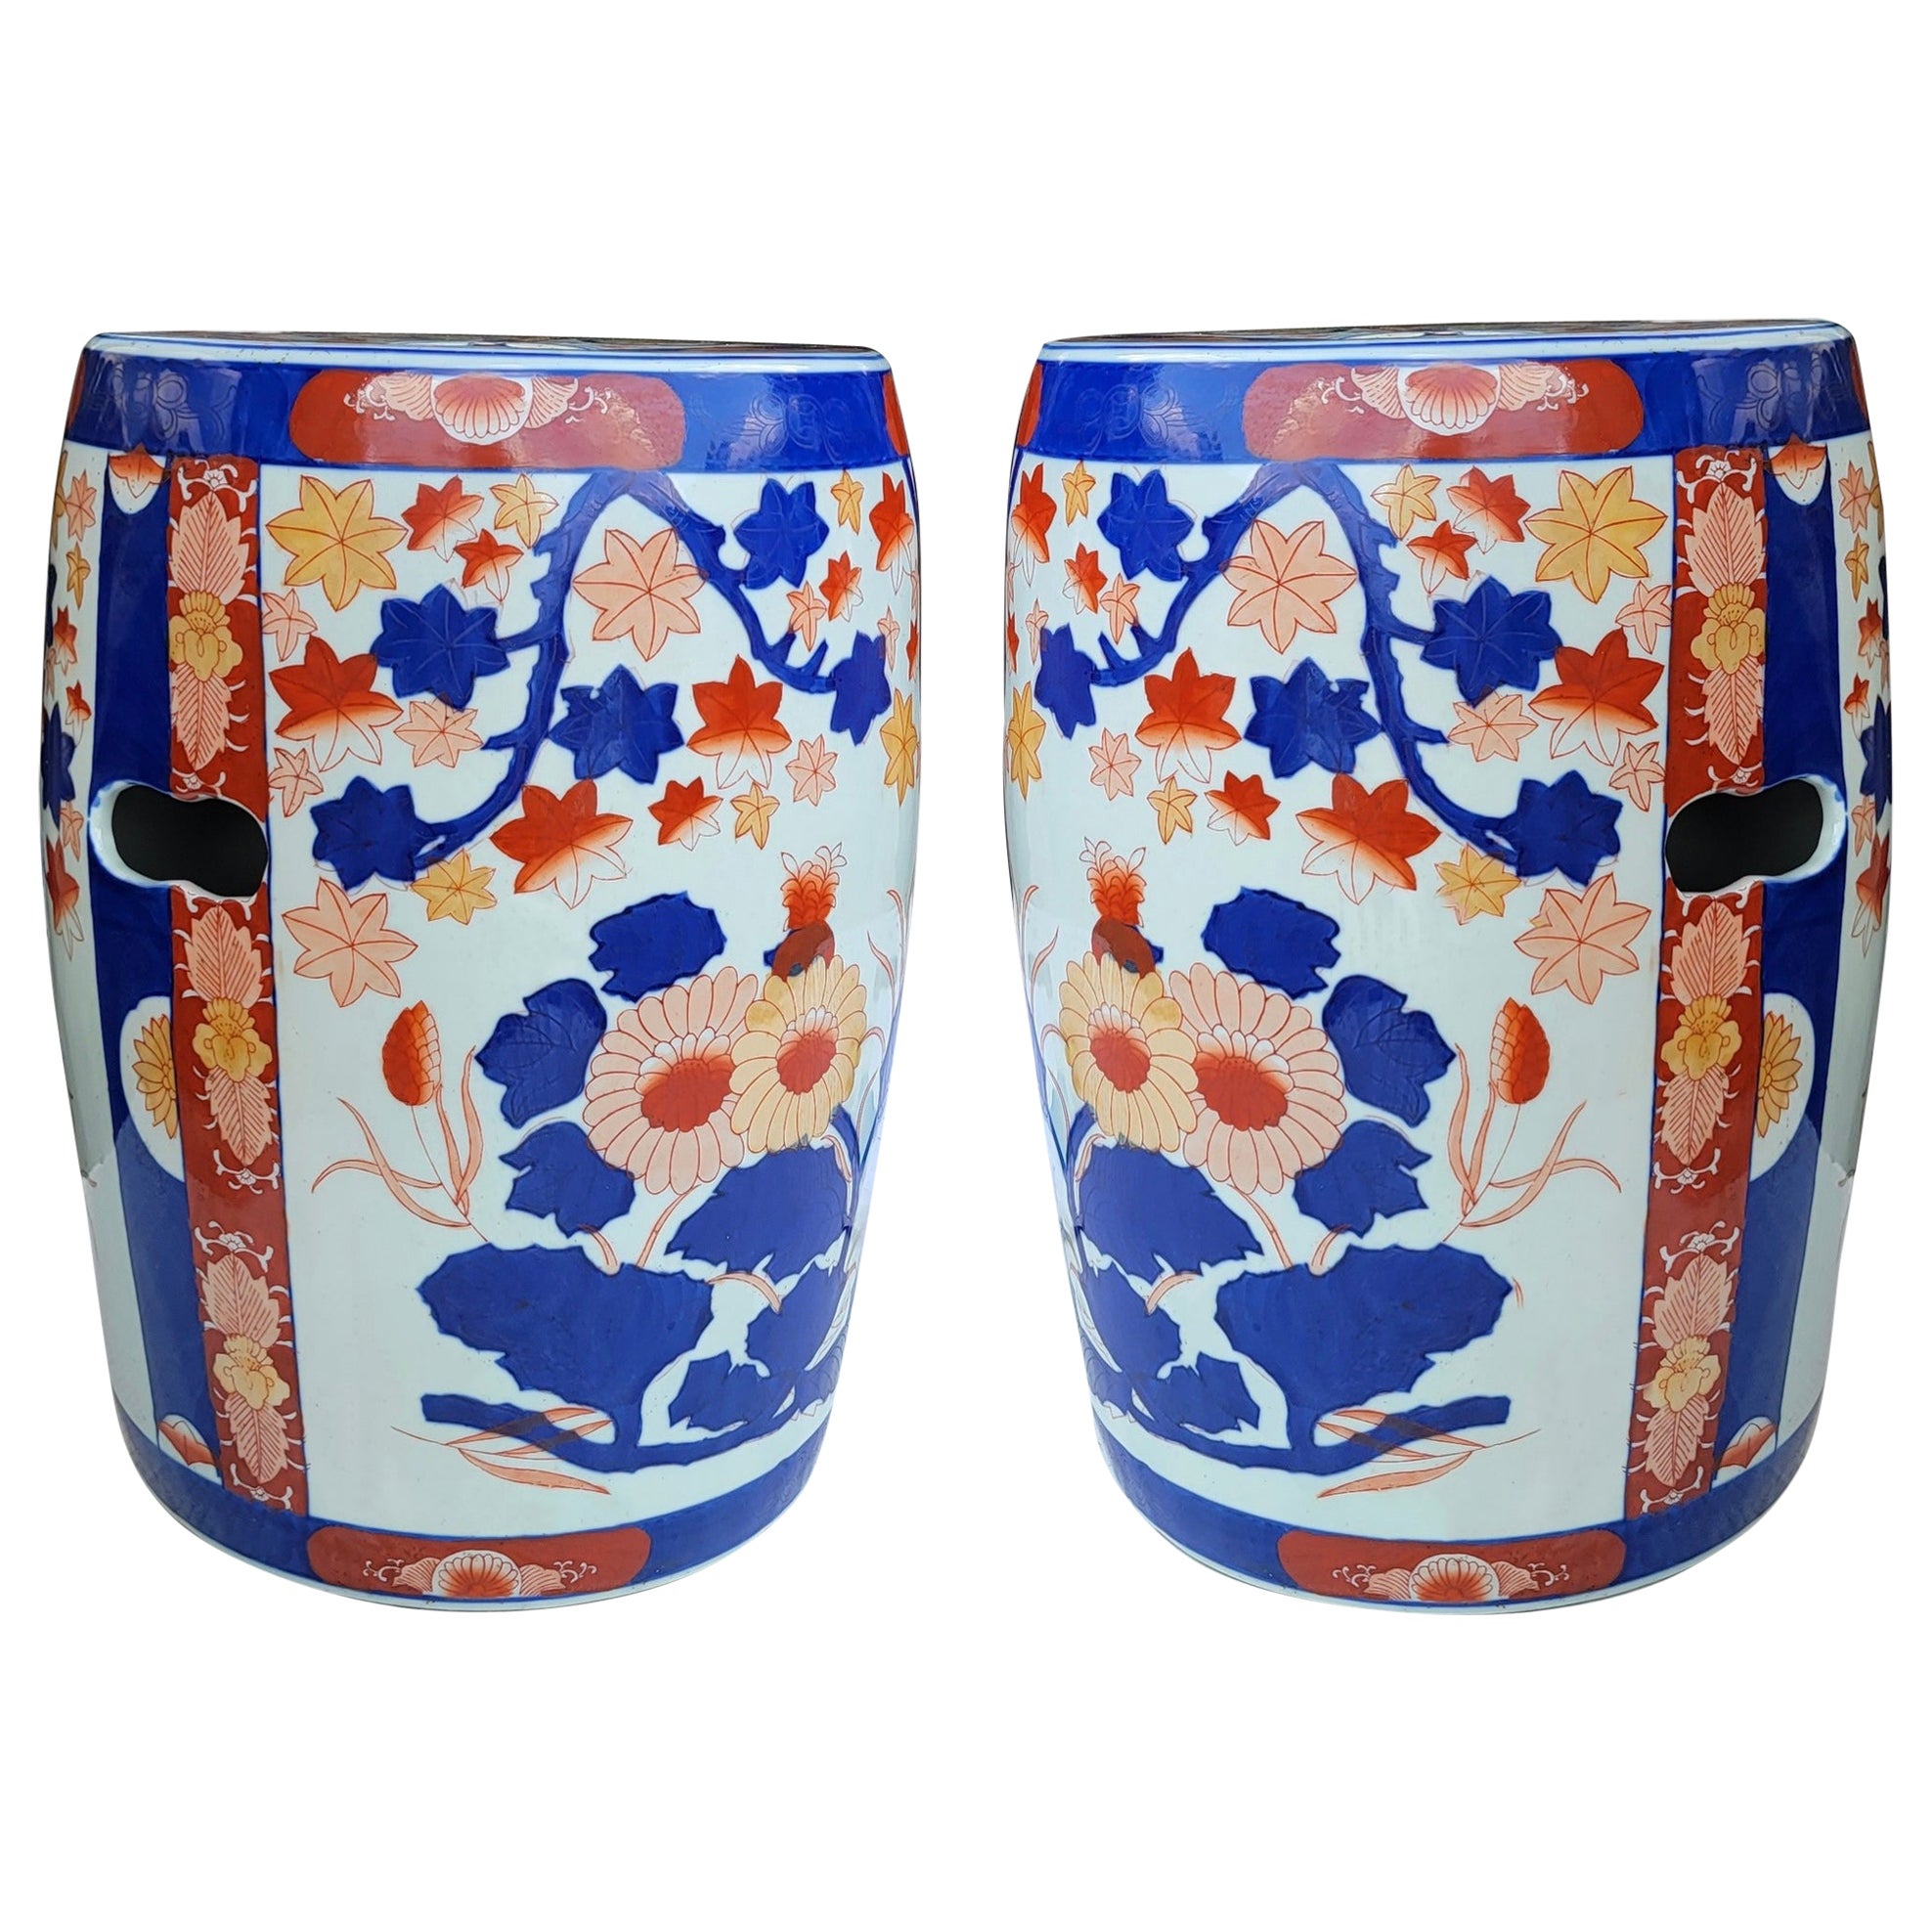 20th-C. Chinese Export Imari Style Blue and Orange Garden Seats / Tables, Pair